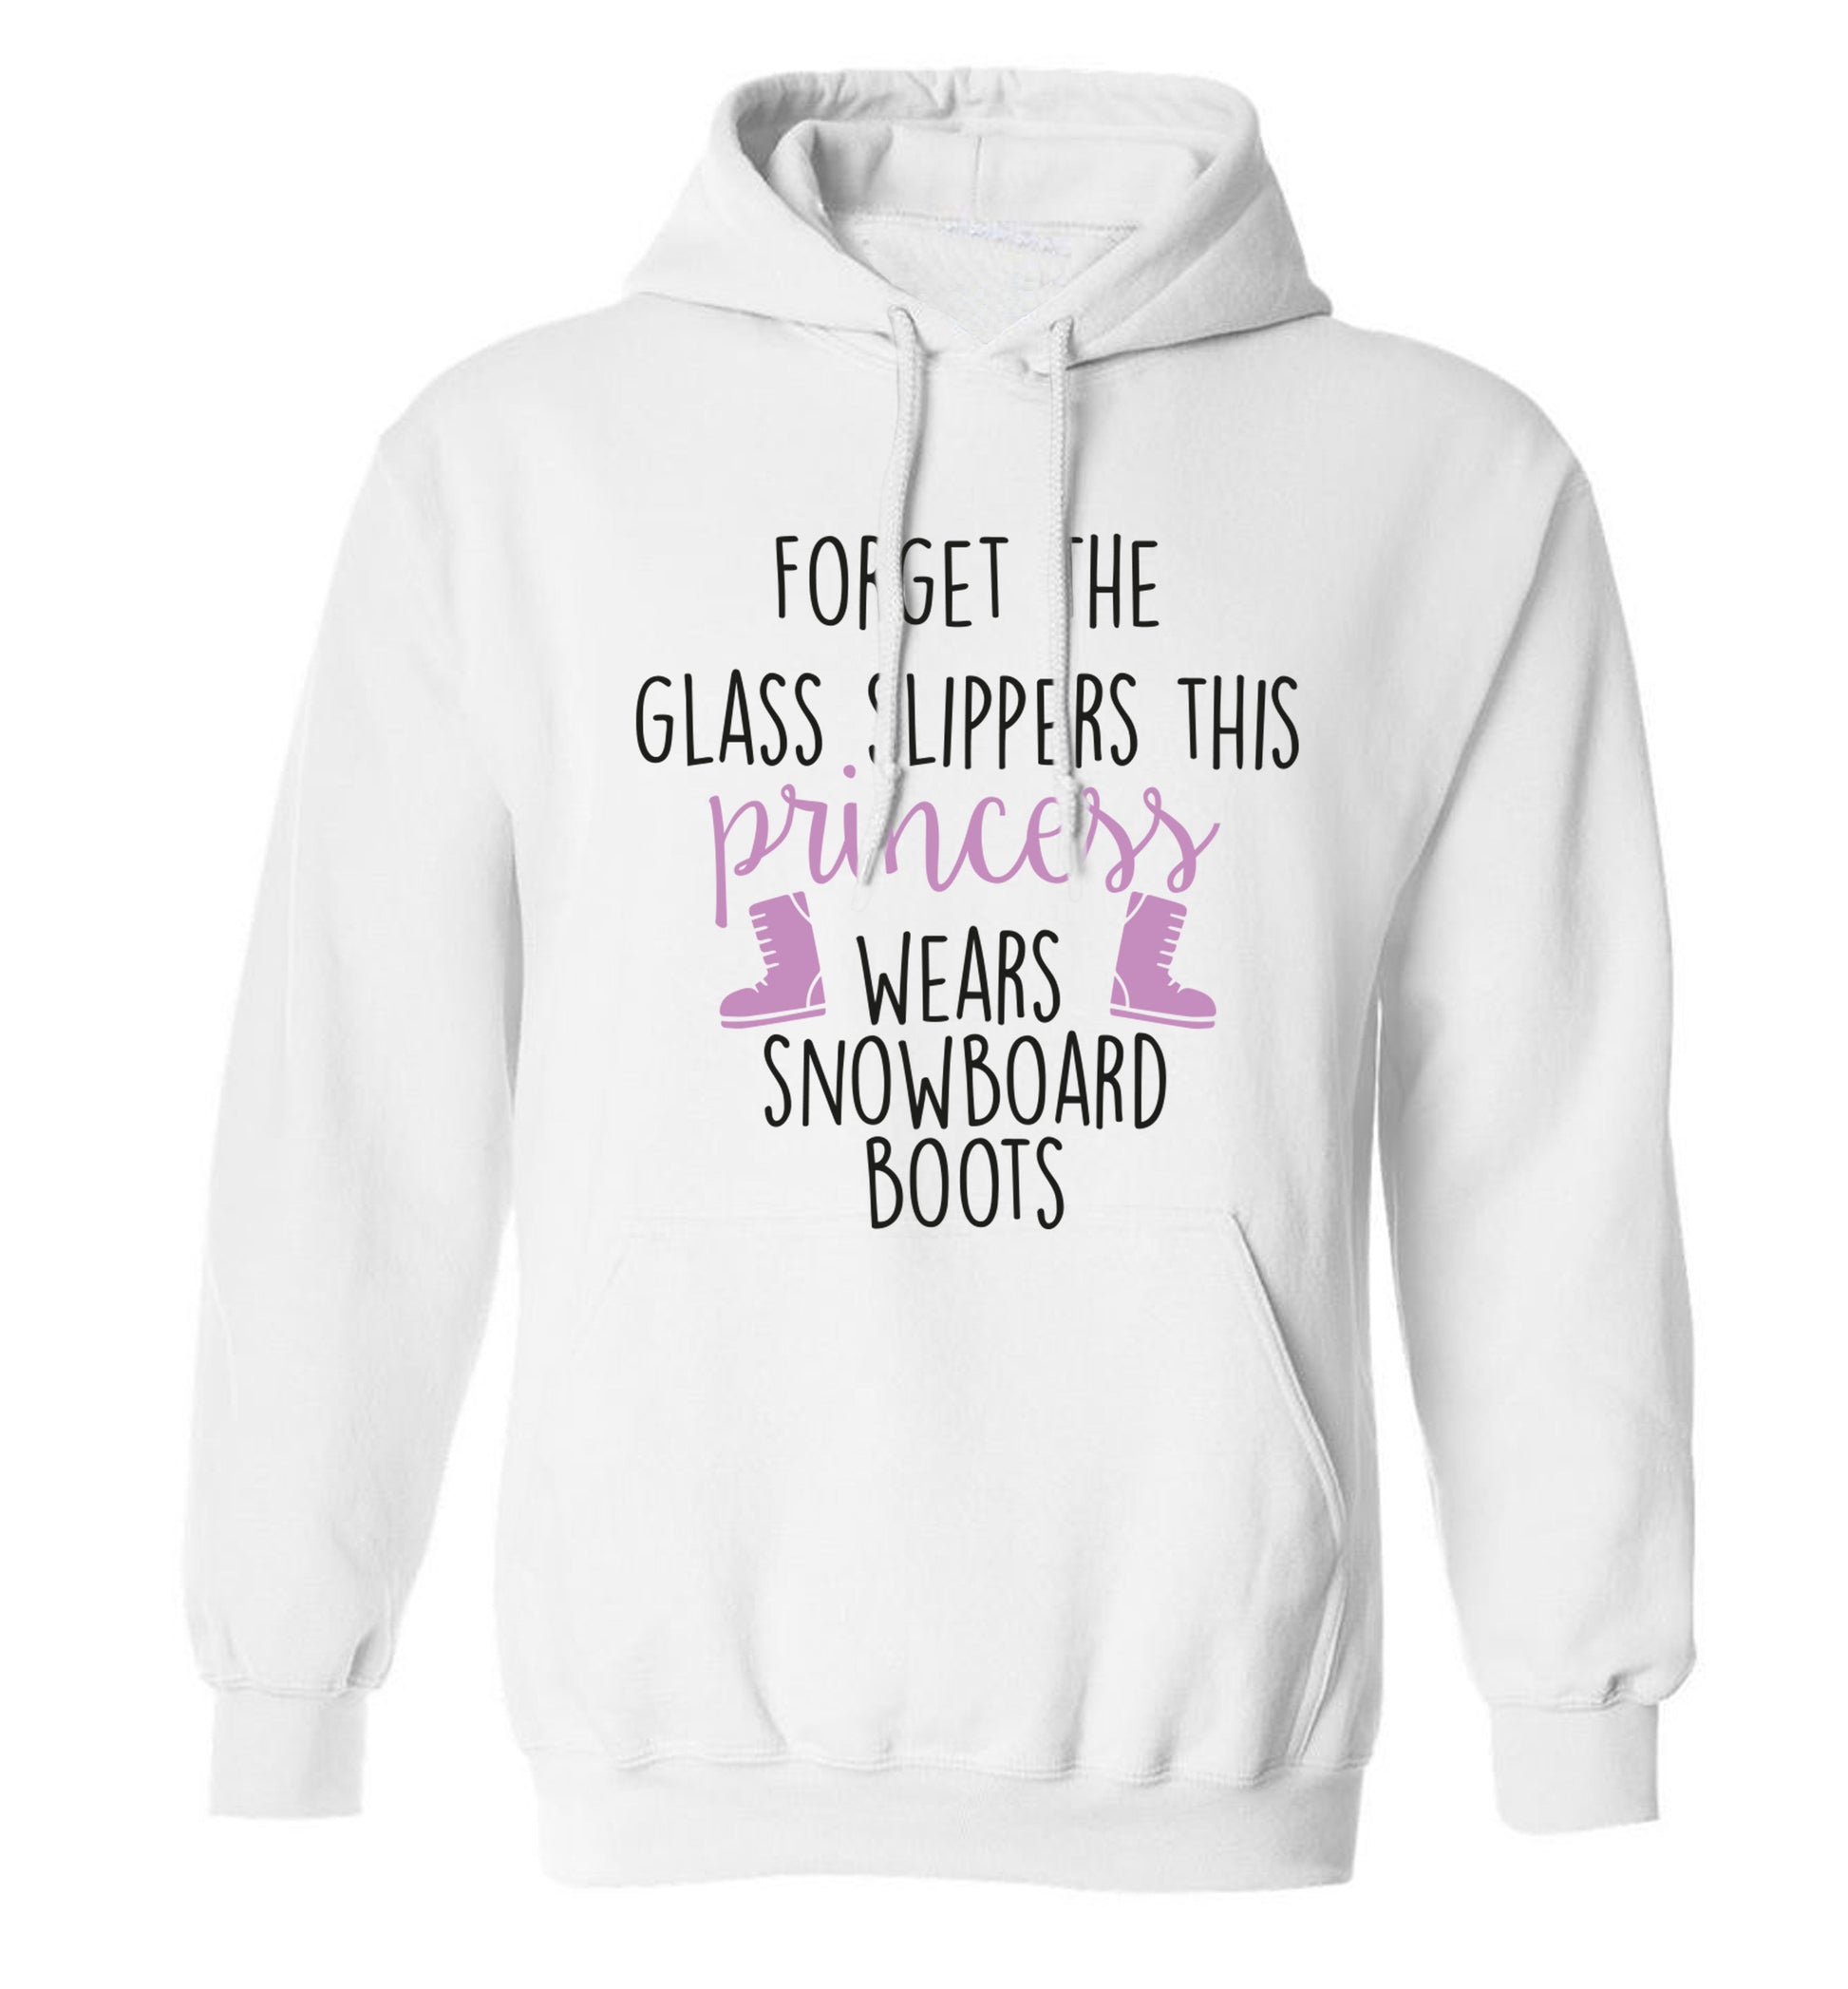 Forget the glass slippers this princess wears snowboard boots adults unisex white hoodie 2XL